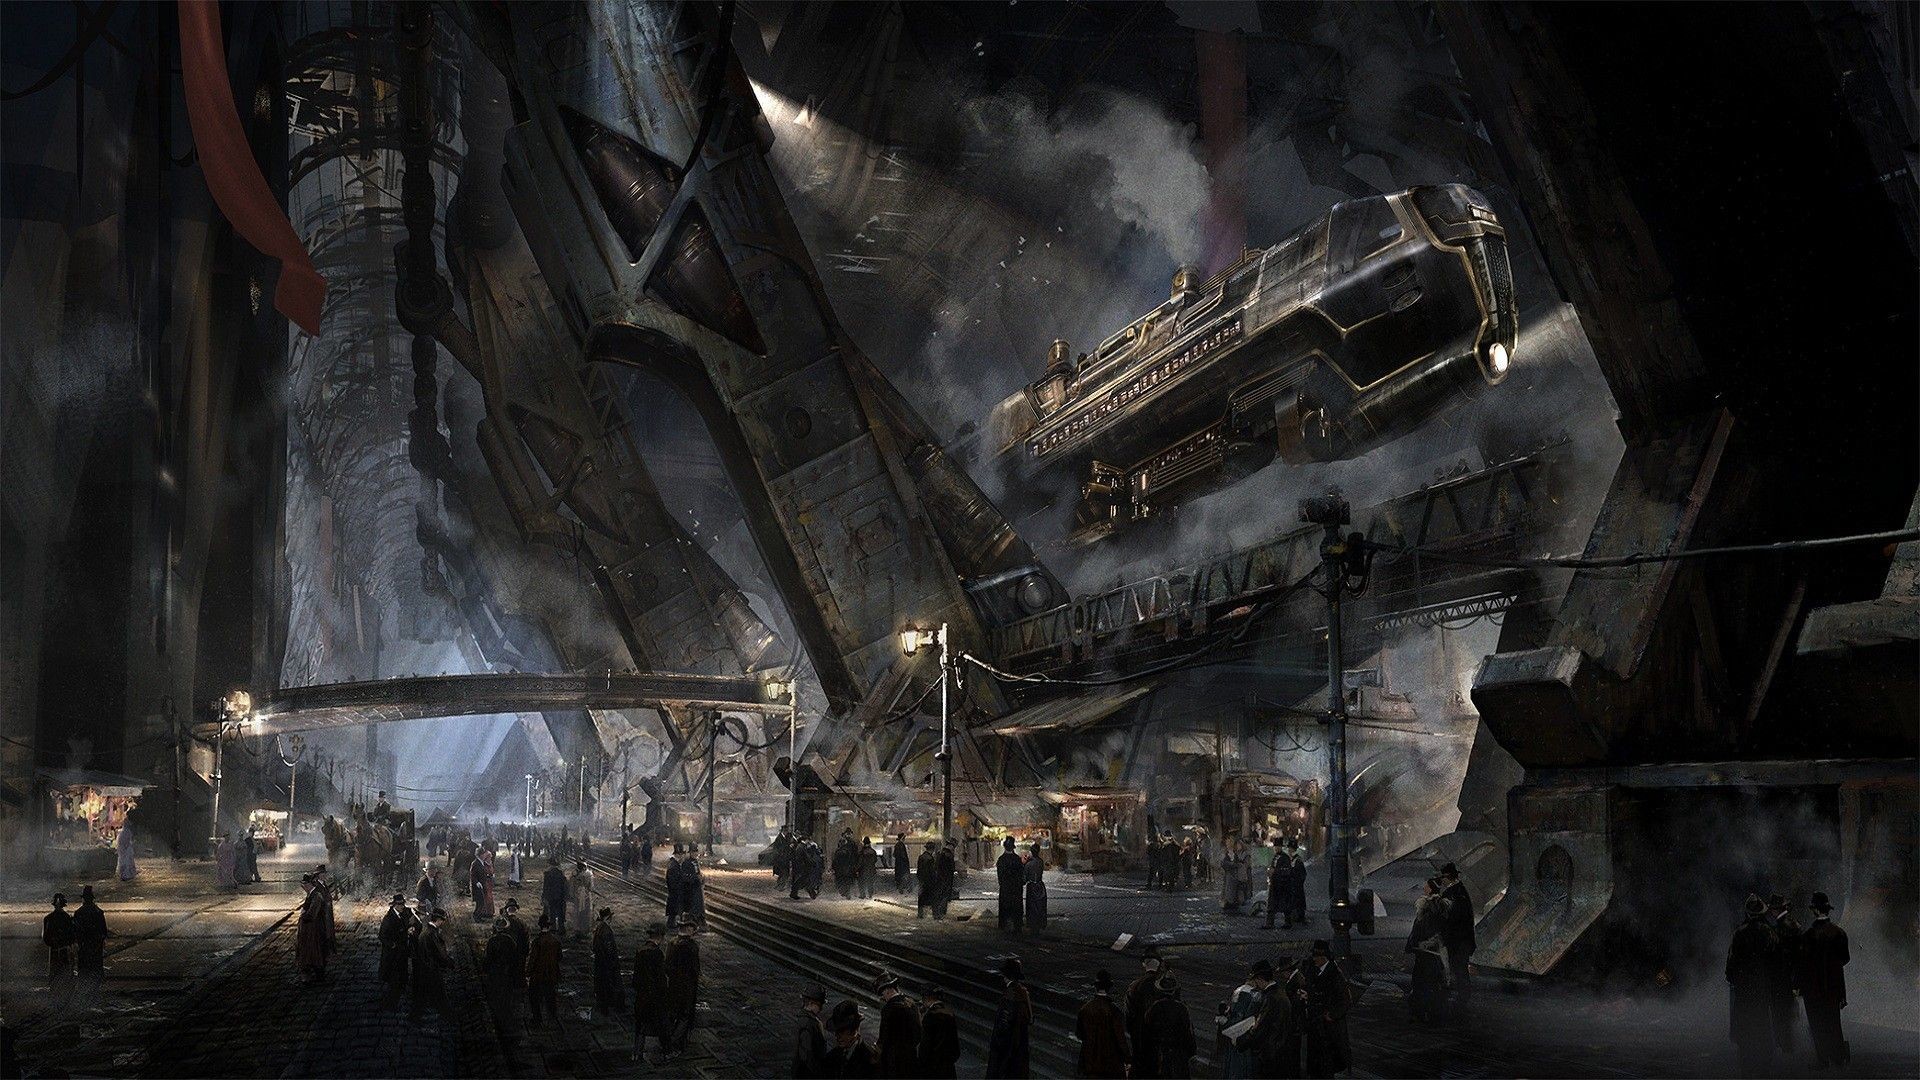 1920x1080 Spaceport Steampunk wallpapers and images - wallpapers, pictures .